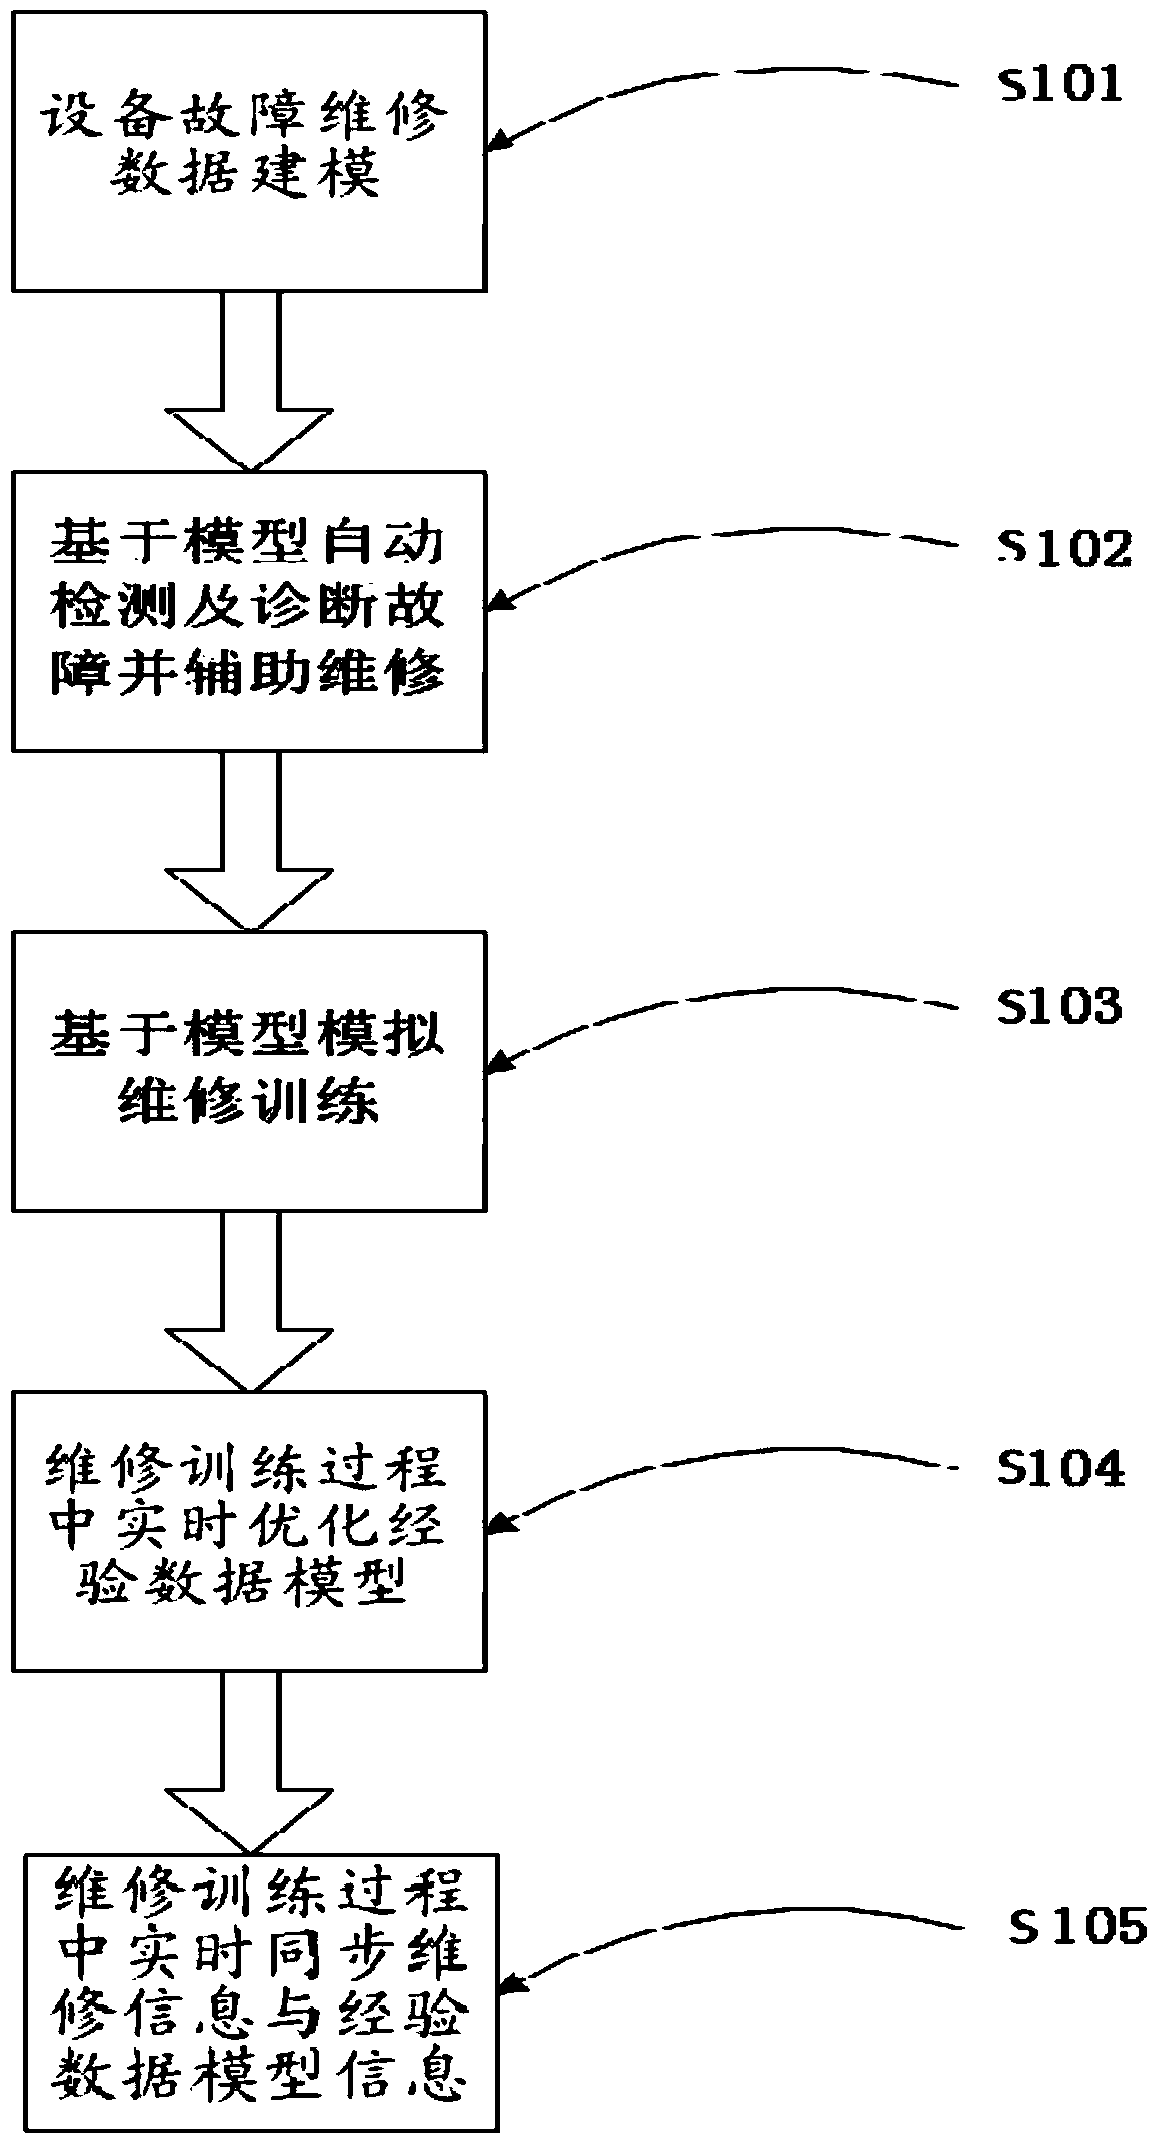 General fault detecting and maintenance method for equipment